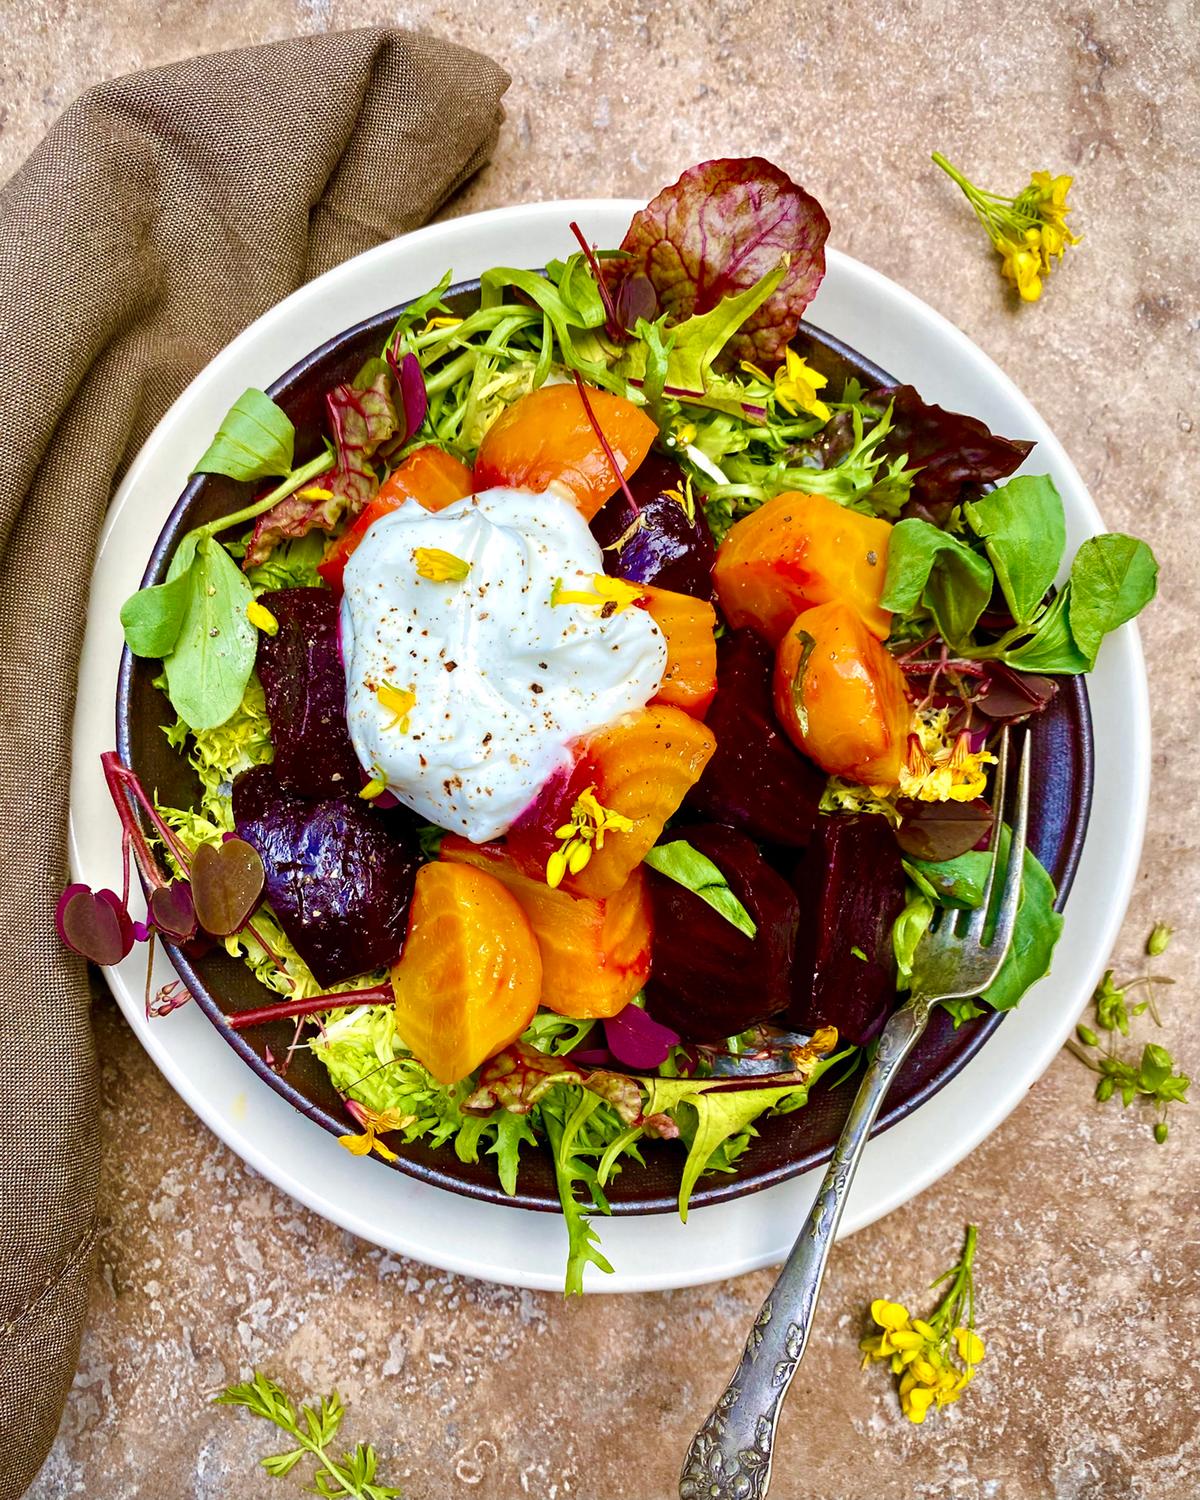 Dollop savory whipped ricotta on this roasted beet and spring greens salad. (Lynda Balslev for Tastefood)